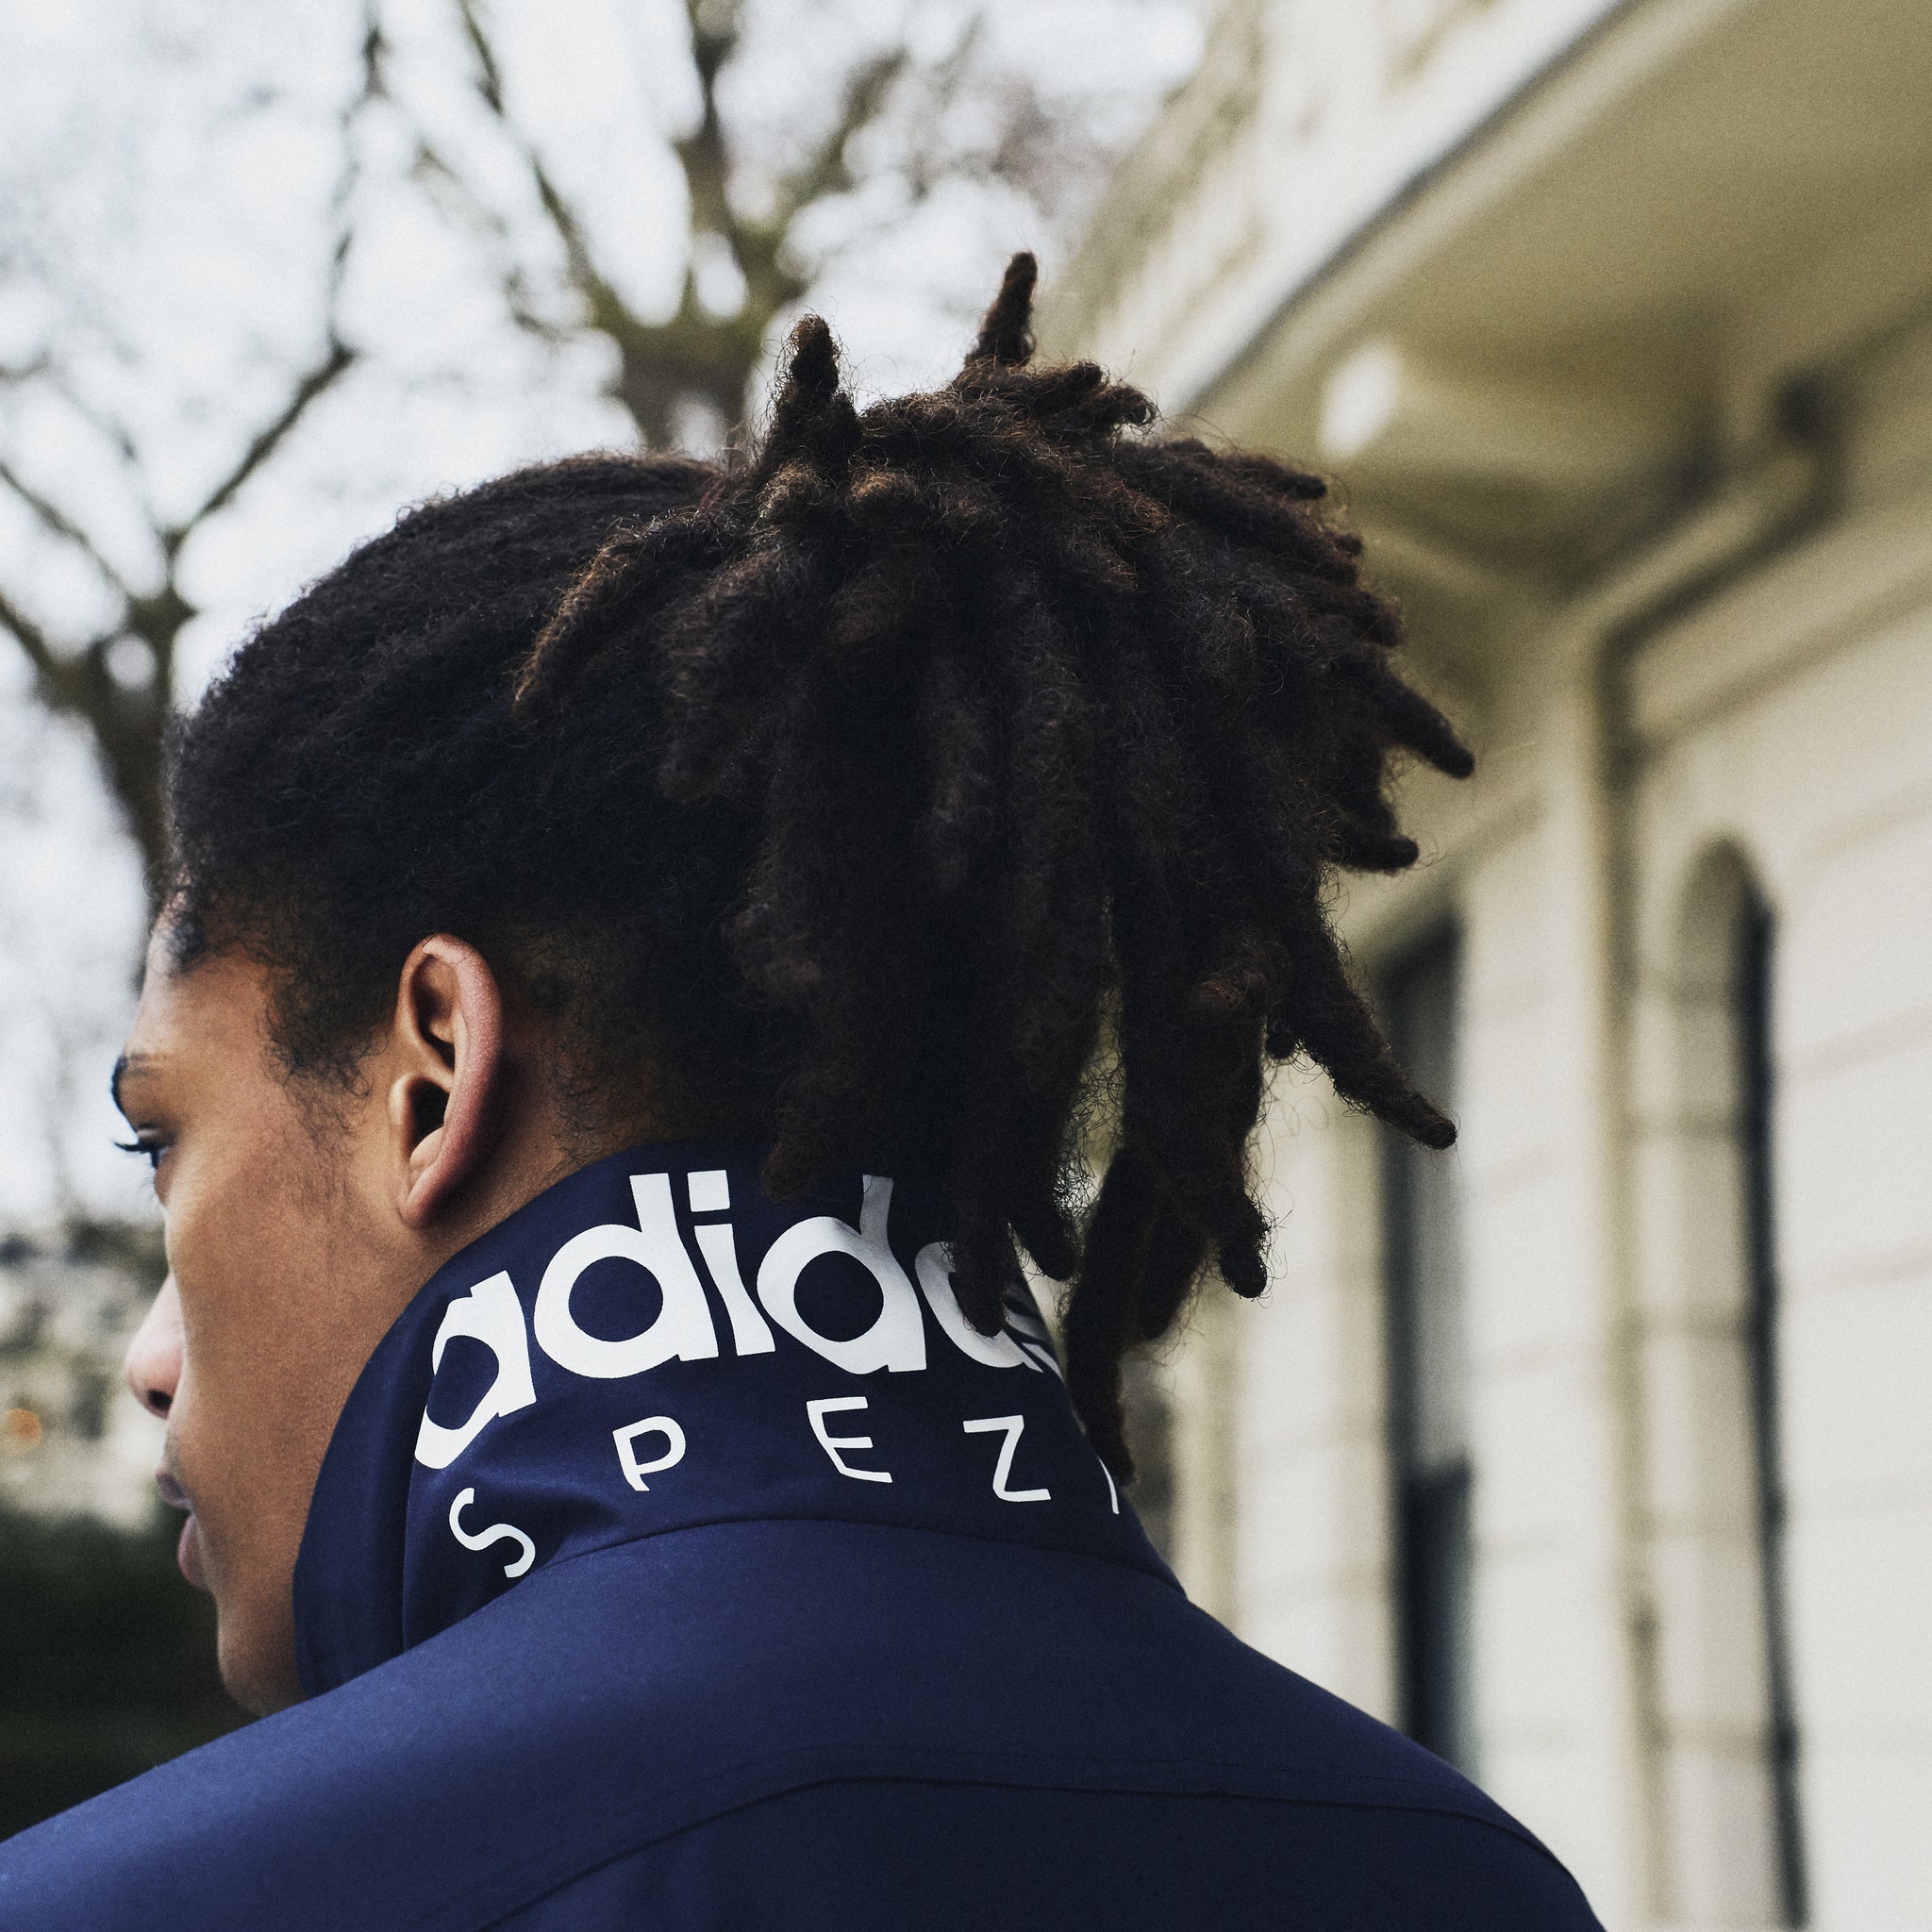 adidas SPEZIAL returns for Spring-Summer 2019 and turns its focus onto the vibrant culture and style